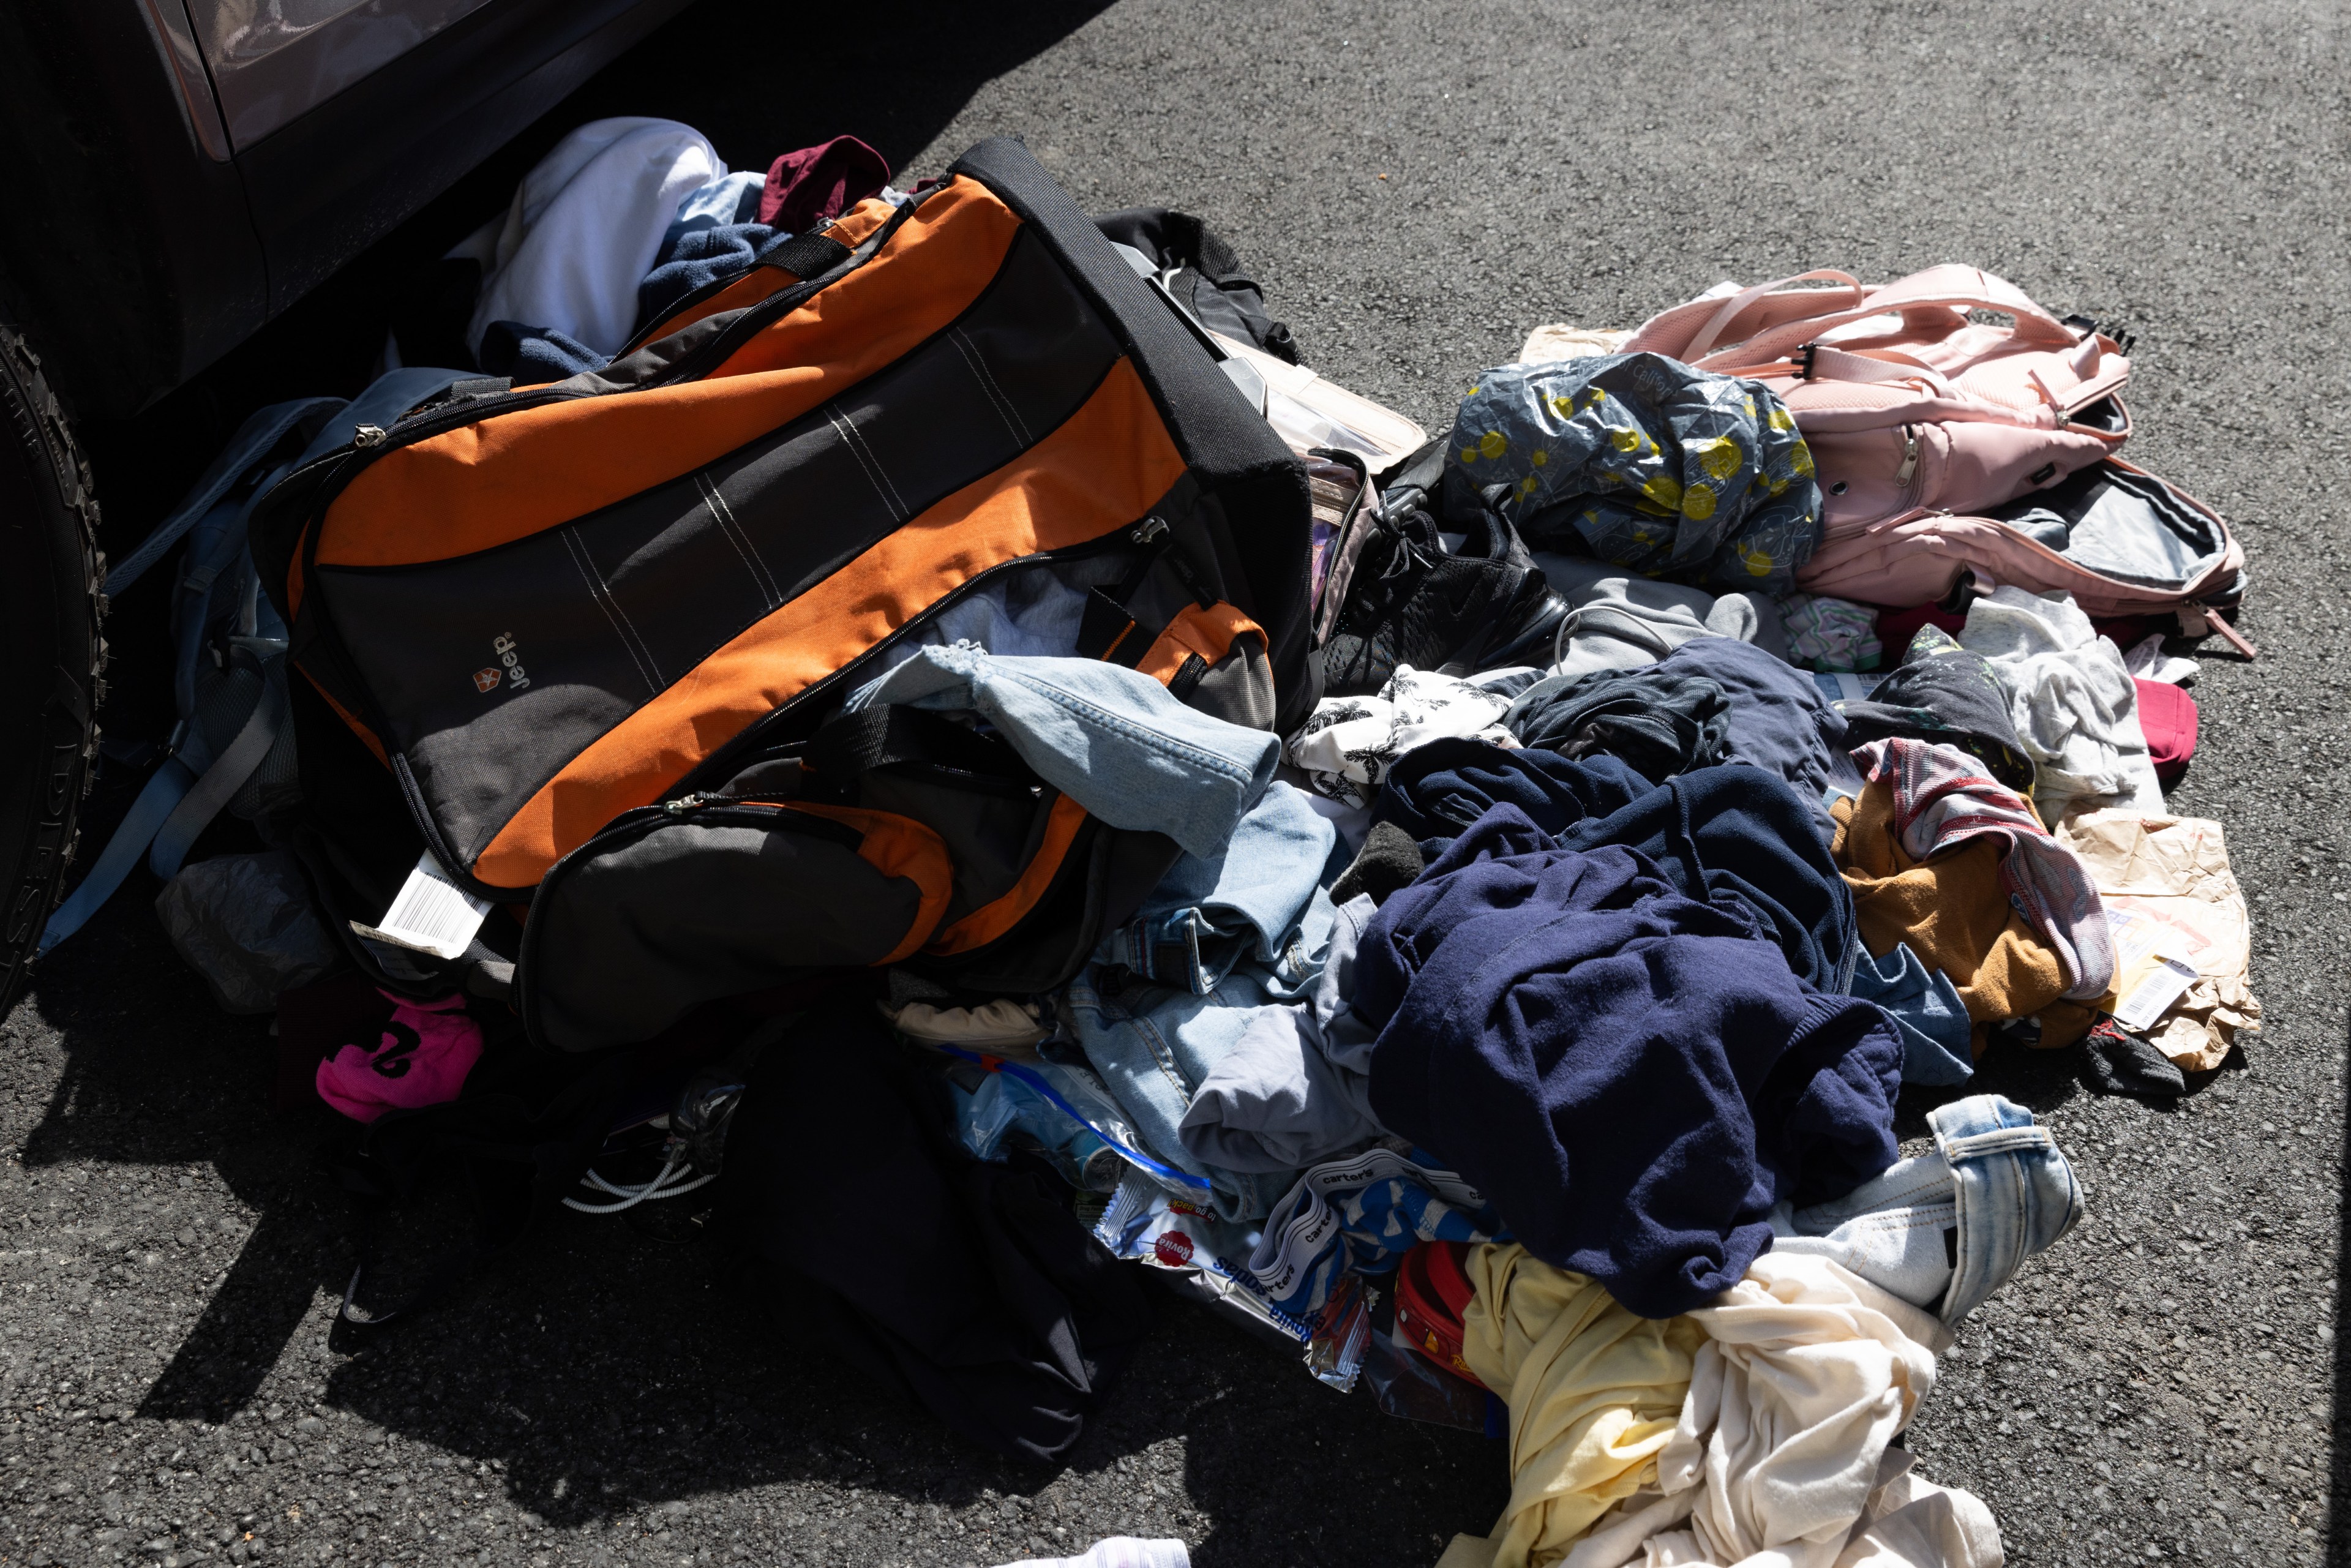 A pile of assorted clothing and several backpacks are strewn on asphalt in a disorganized manner, suggesting a hurried or chaotic situation.